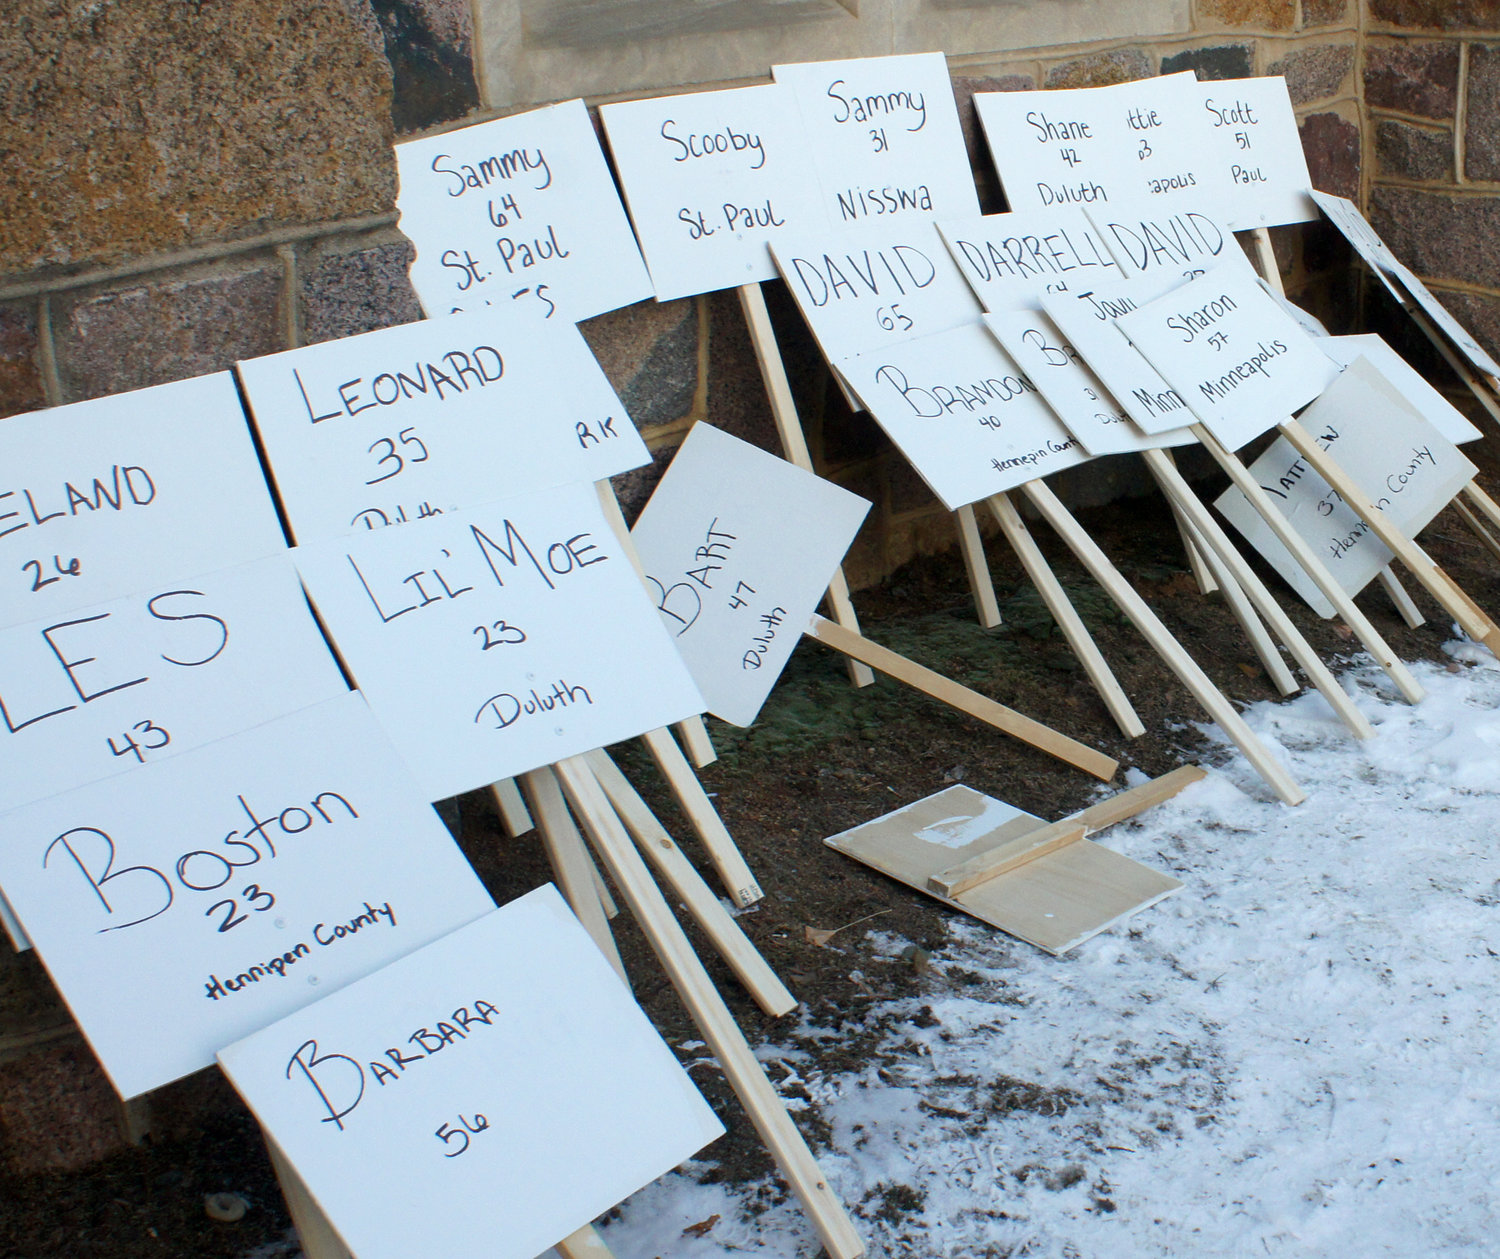 A memorial march for the homeless who have died took place Thursday, Dec. 16, 2021 at 4 p.m. Braving the cold, about 200 marchers bearing signs with the ages and names of the deceased started from Plymouth Congregational Church (19th and Nicollet Ave.) and looped north, returning to the church